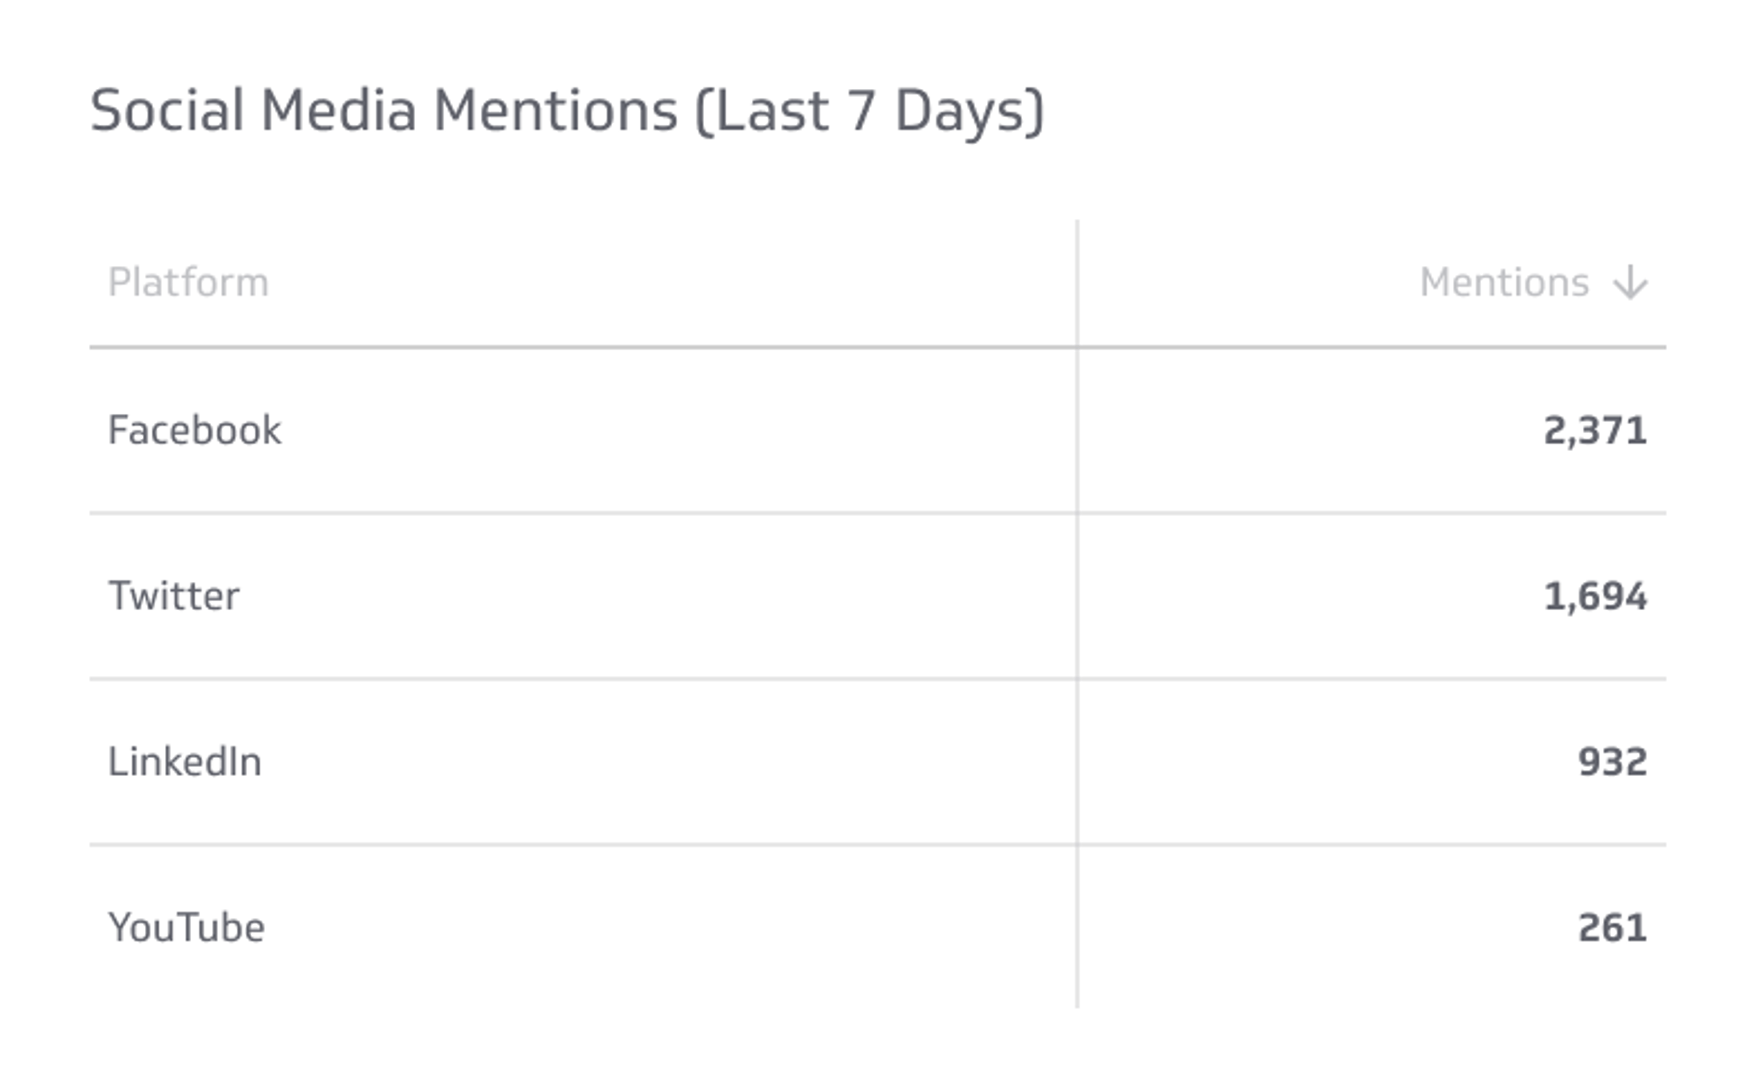 Related KPI Examples - Social Media Mentions Metric